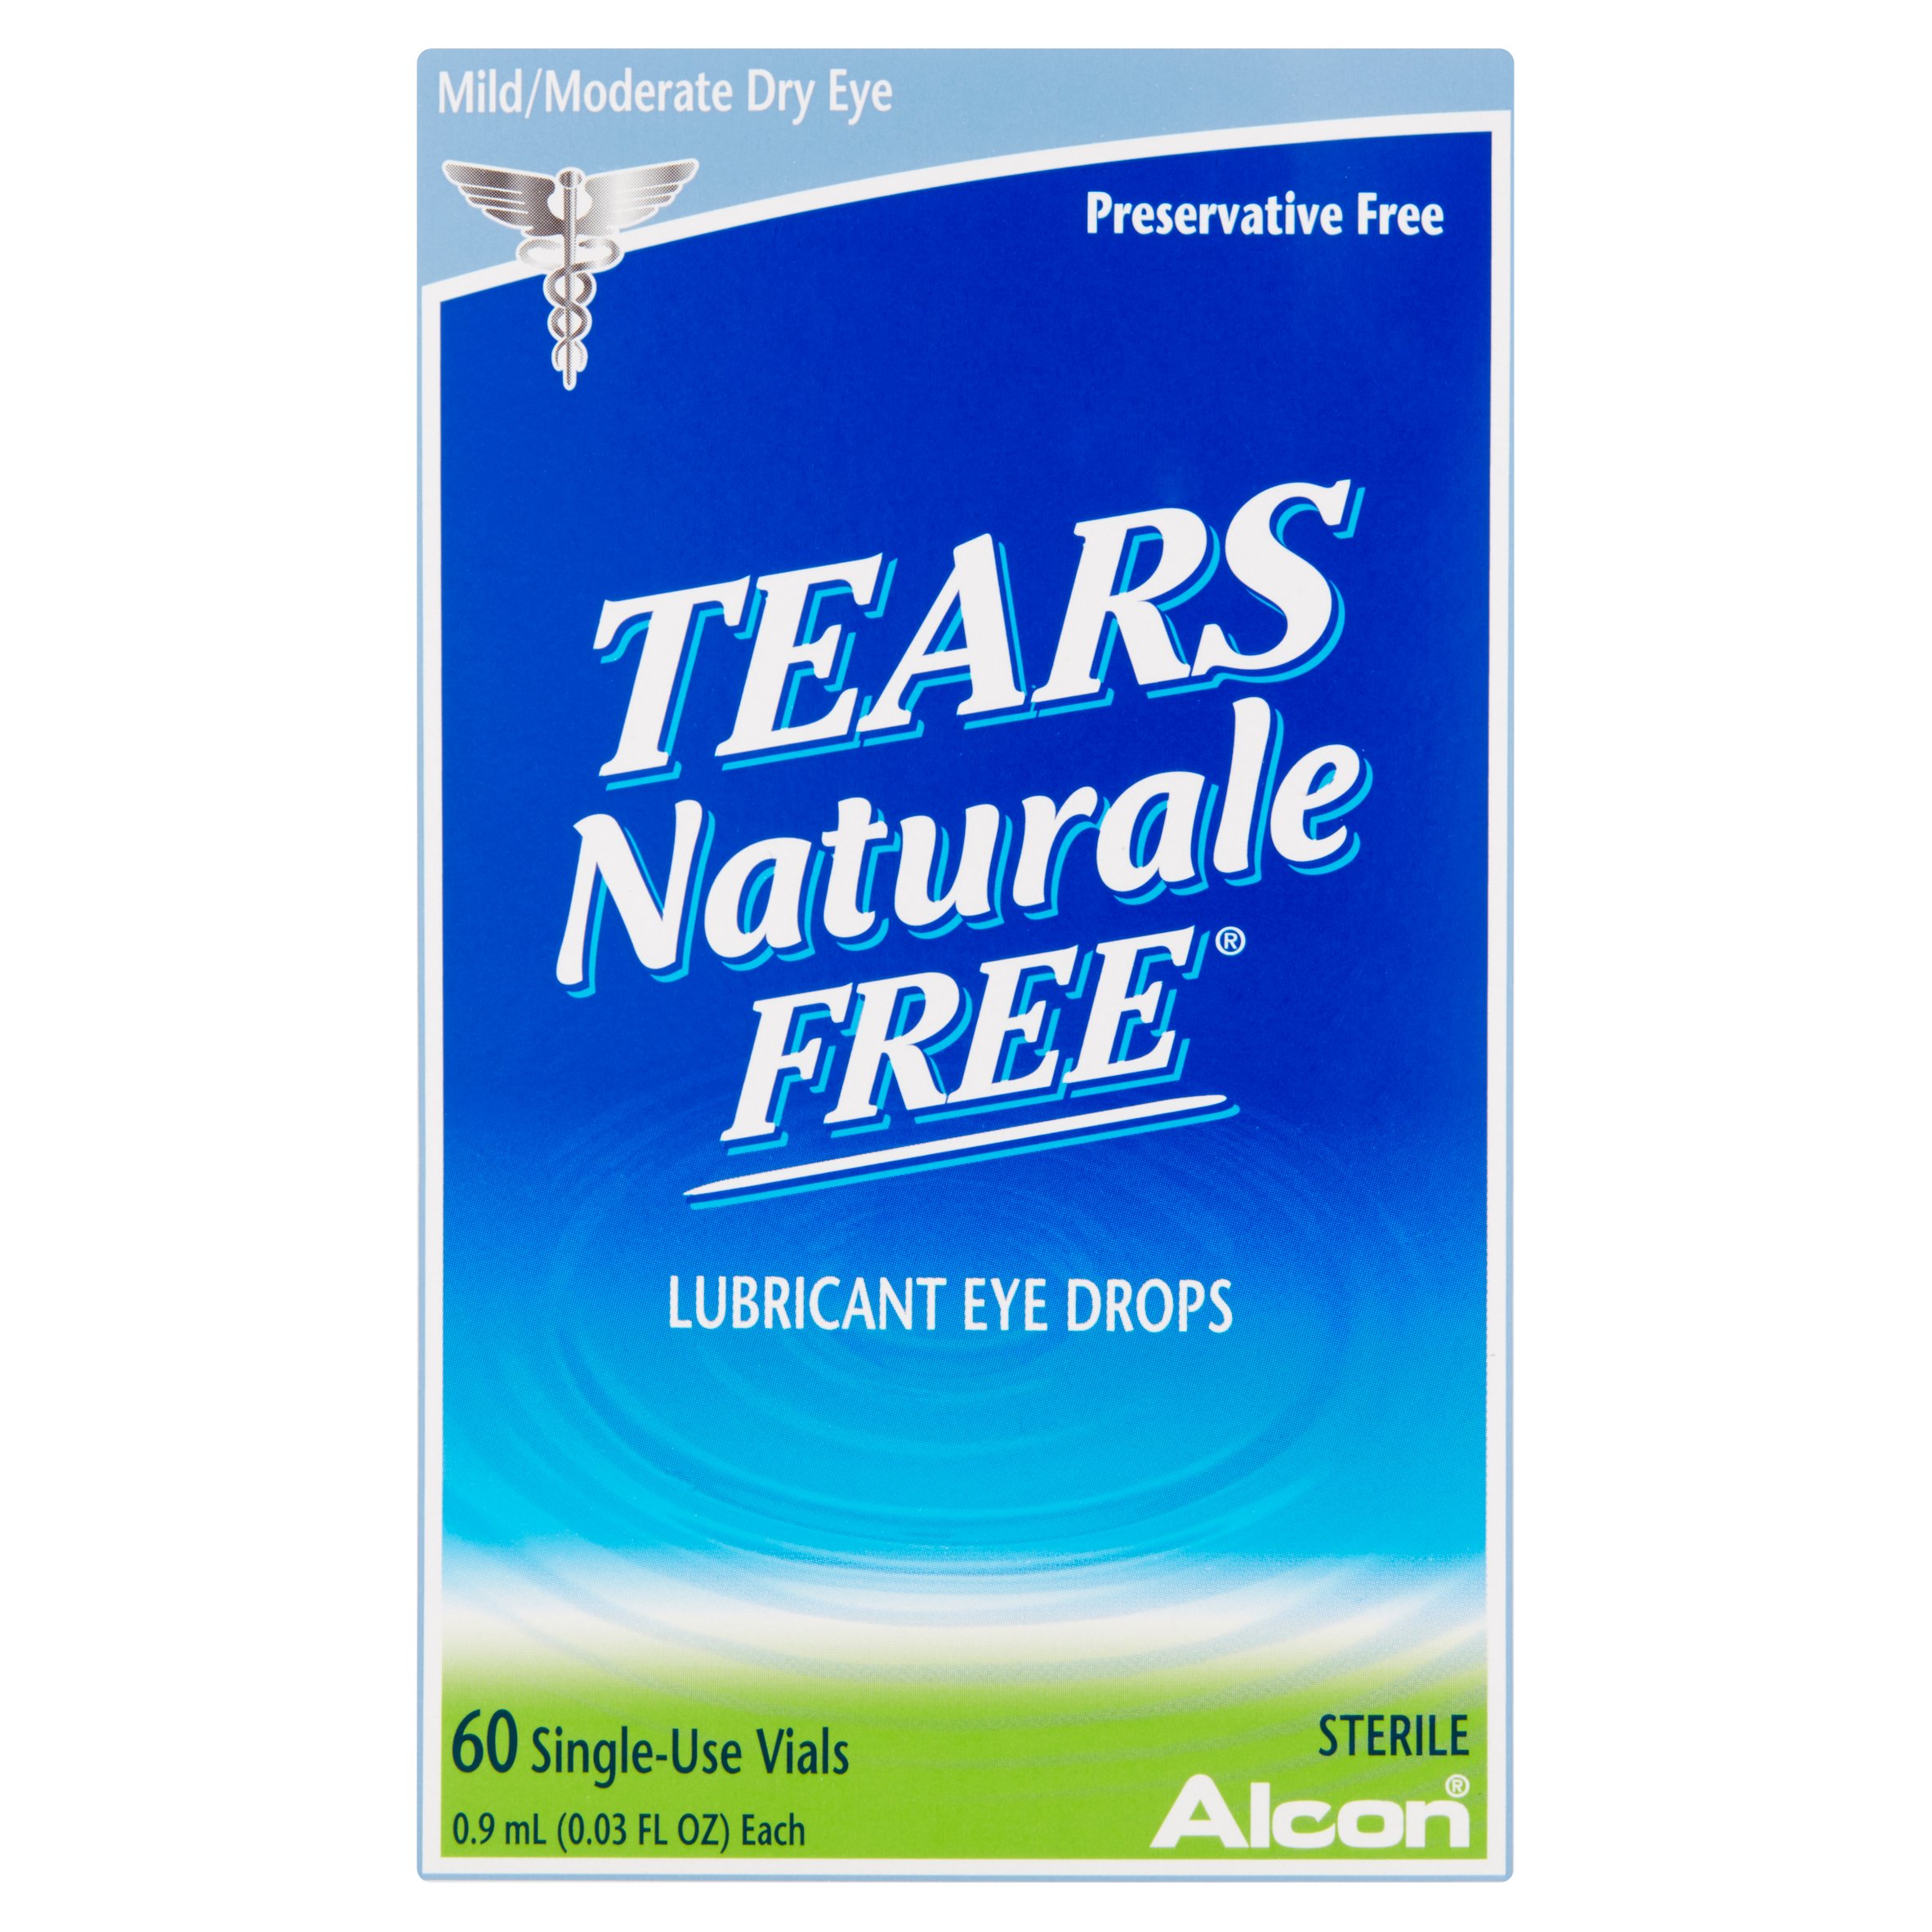 Alcon Tears Naturale II Preservative Free Vials Dry Eye Lubricant Artificial Tears - 60 ct - image 1 of 5